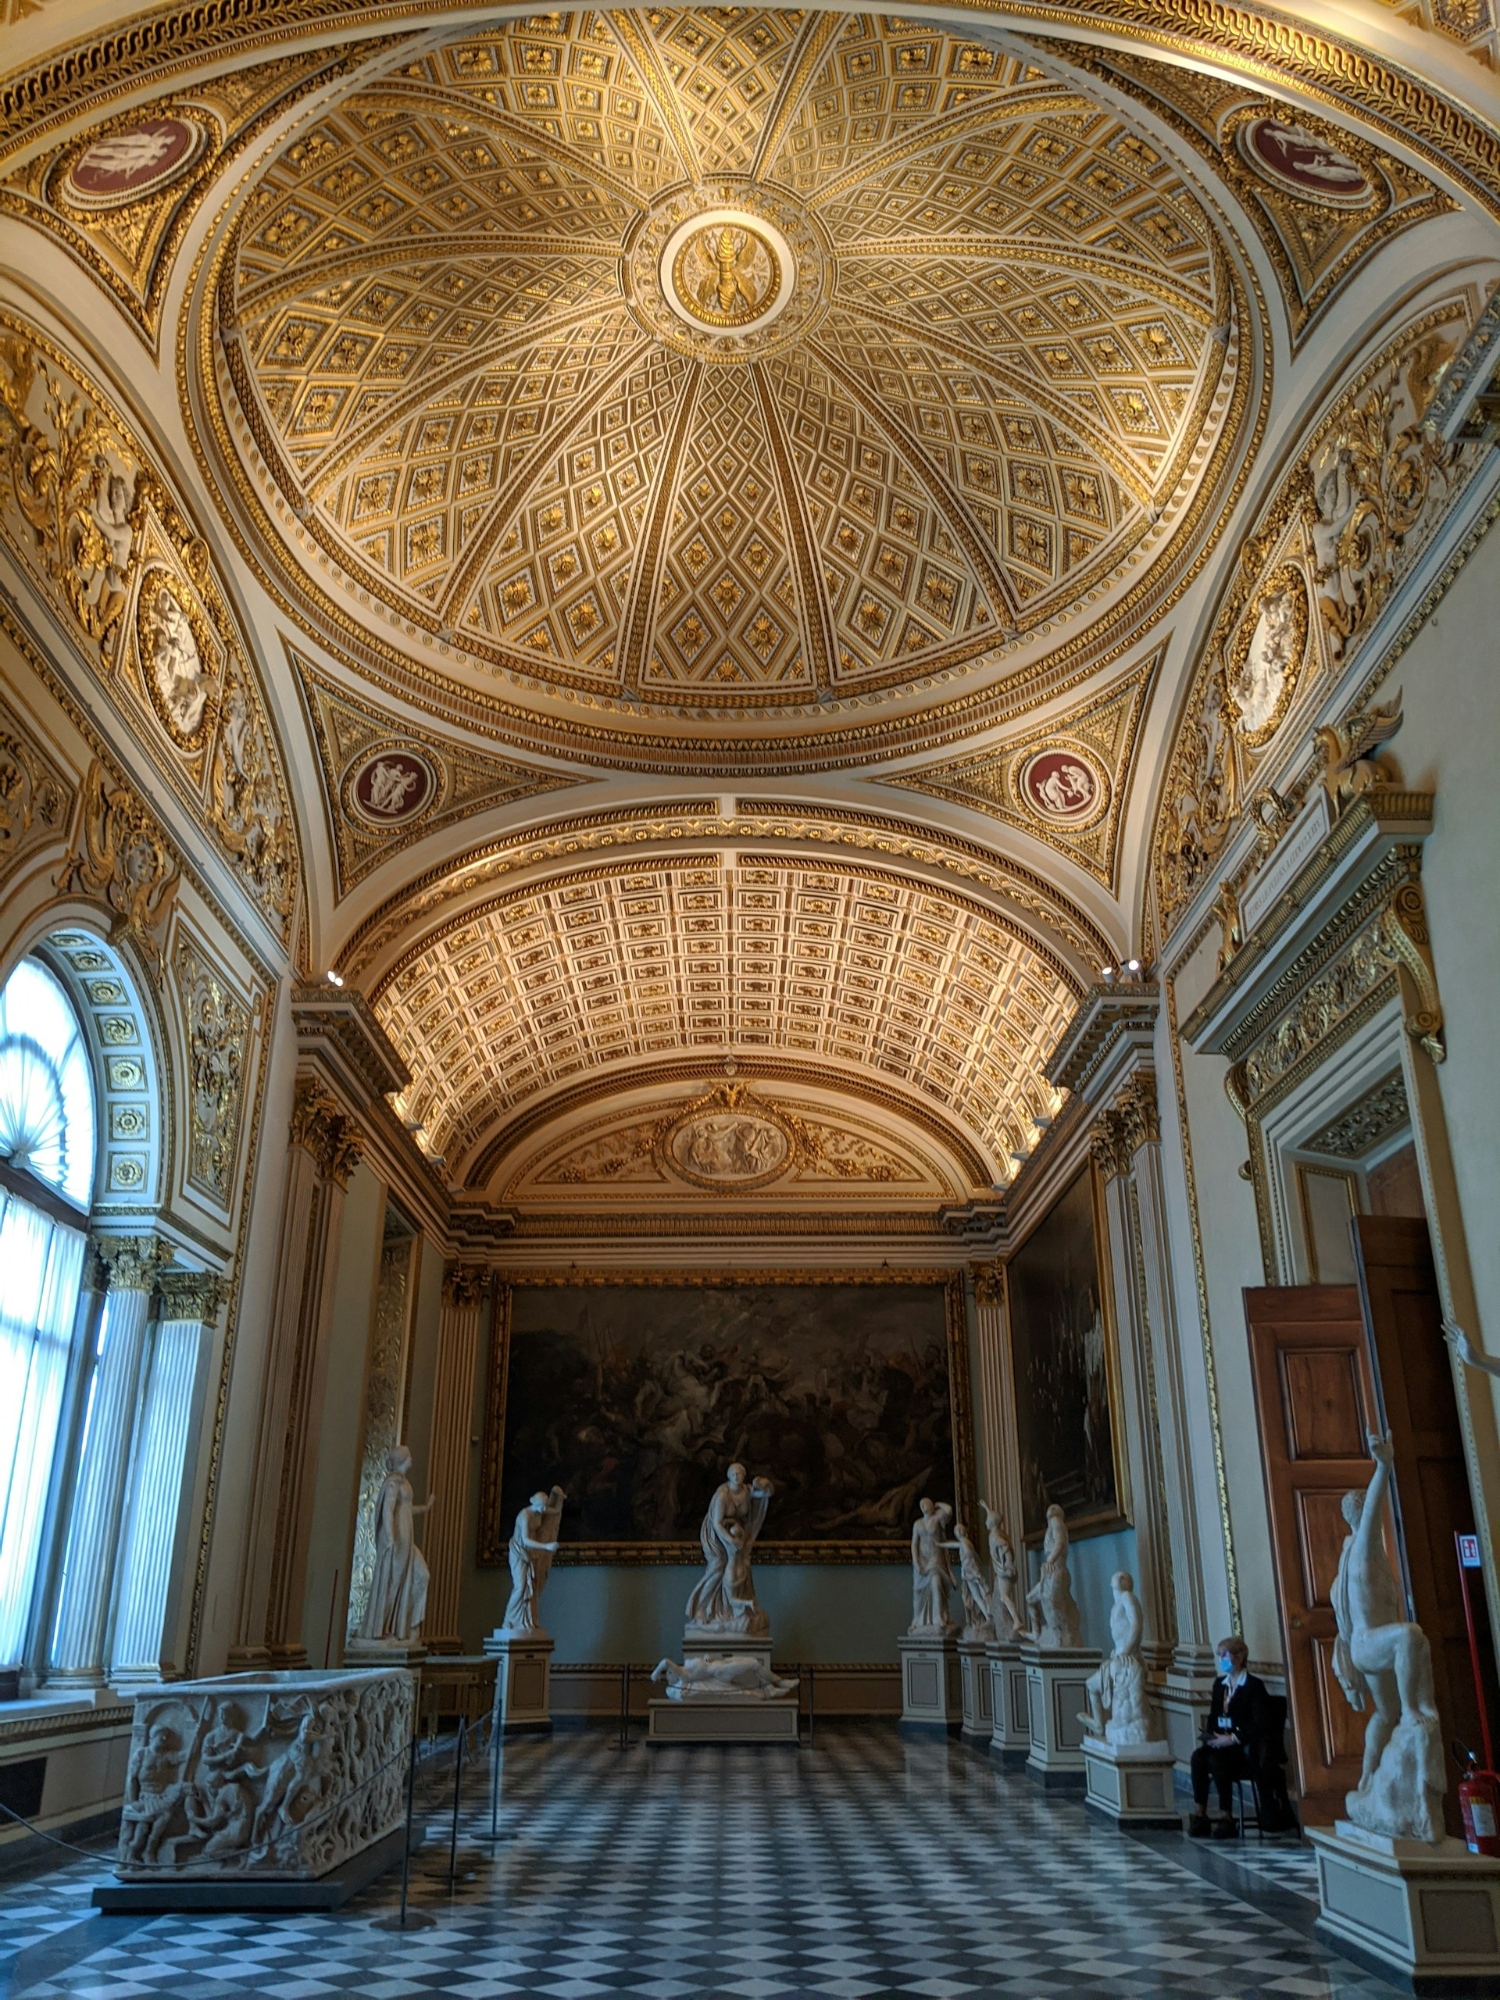 Uffizi Gallery, skip-the-line ticket and guided tour